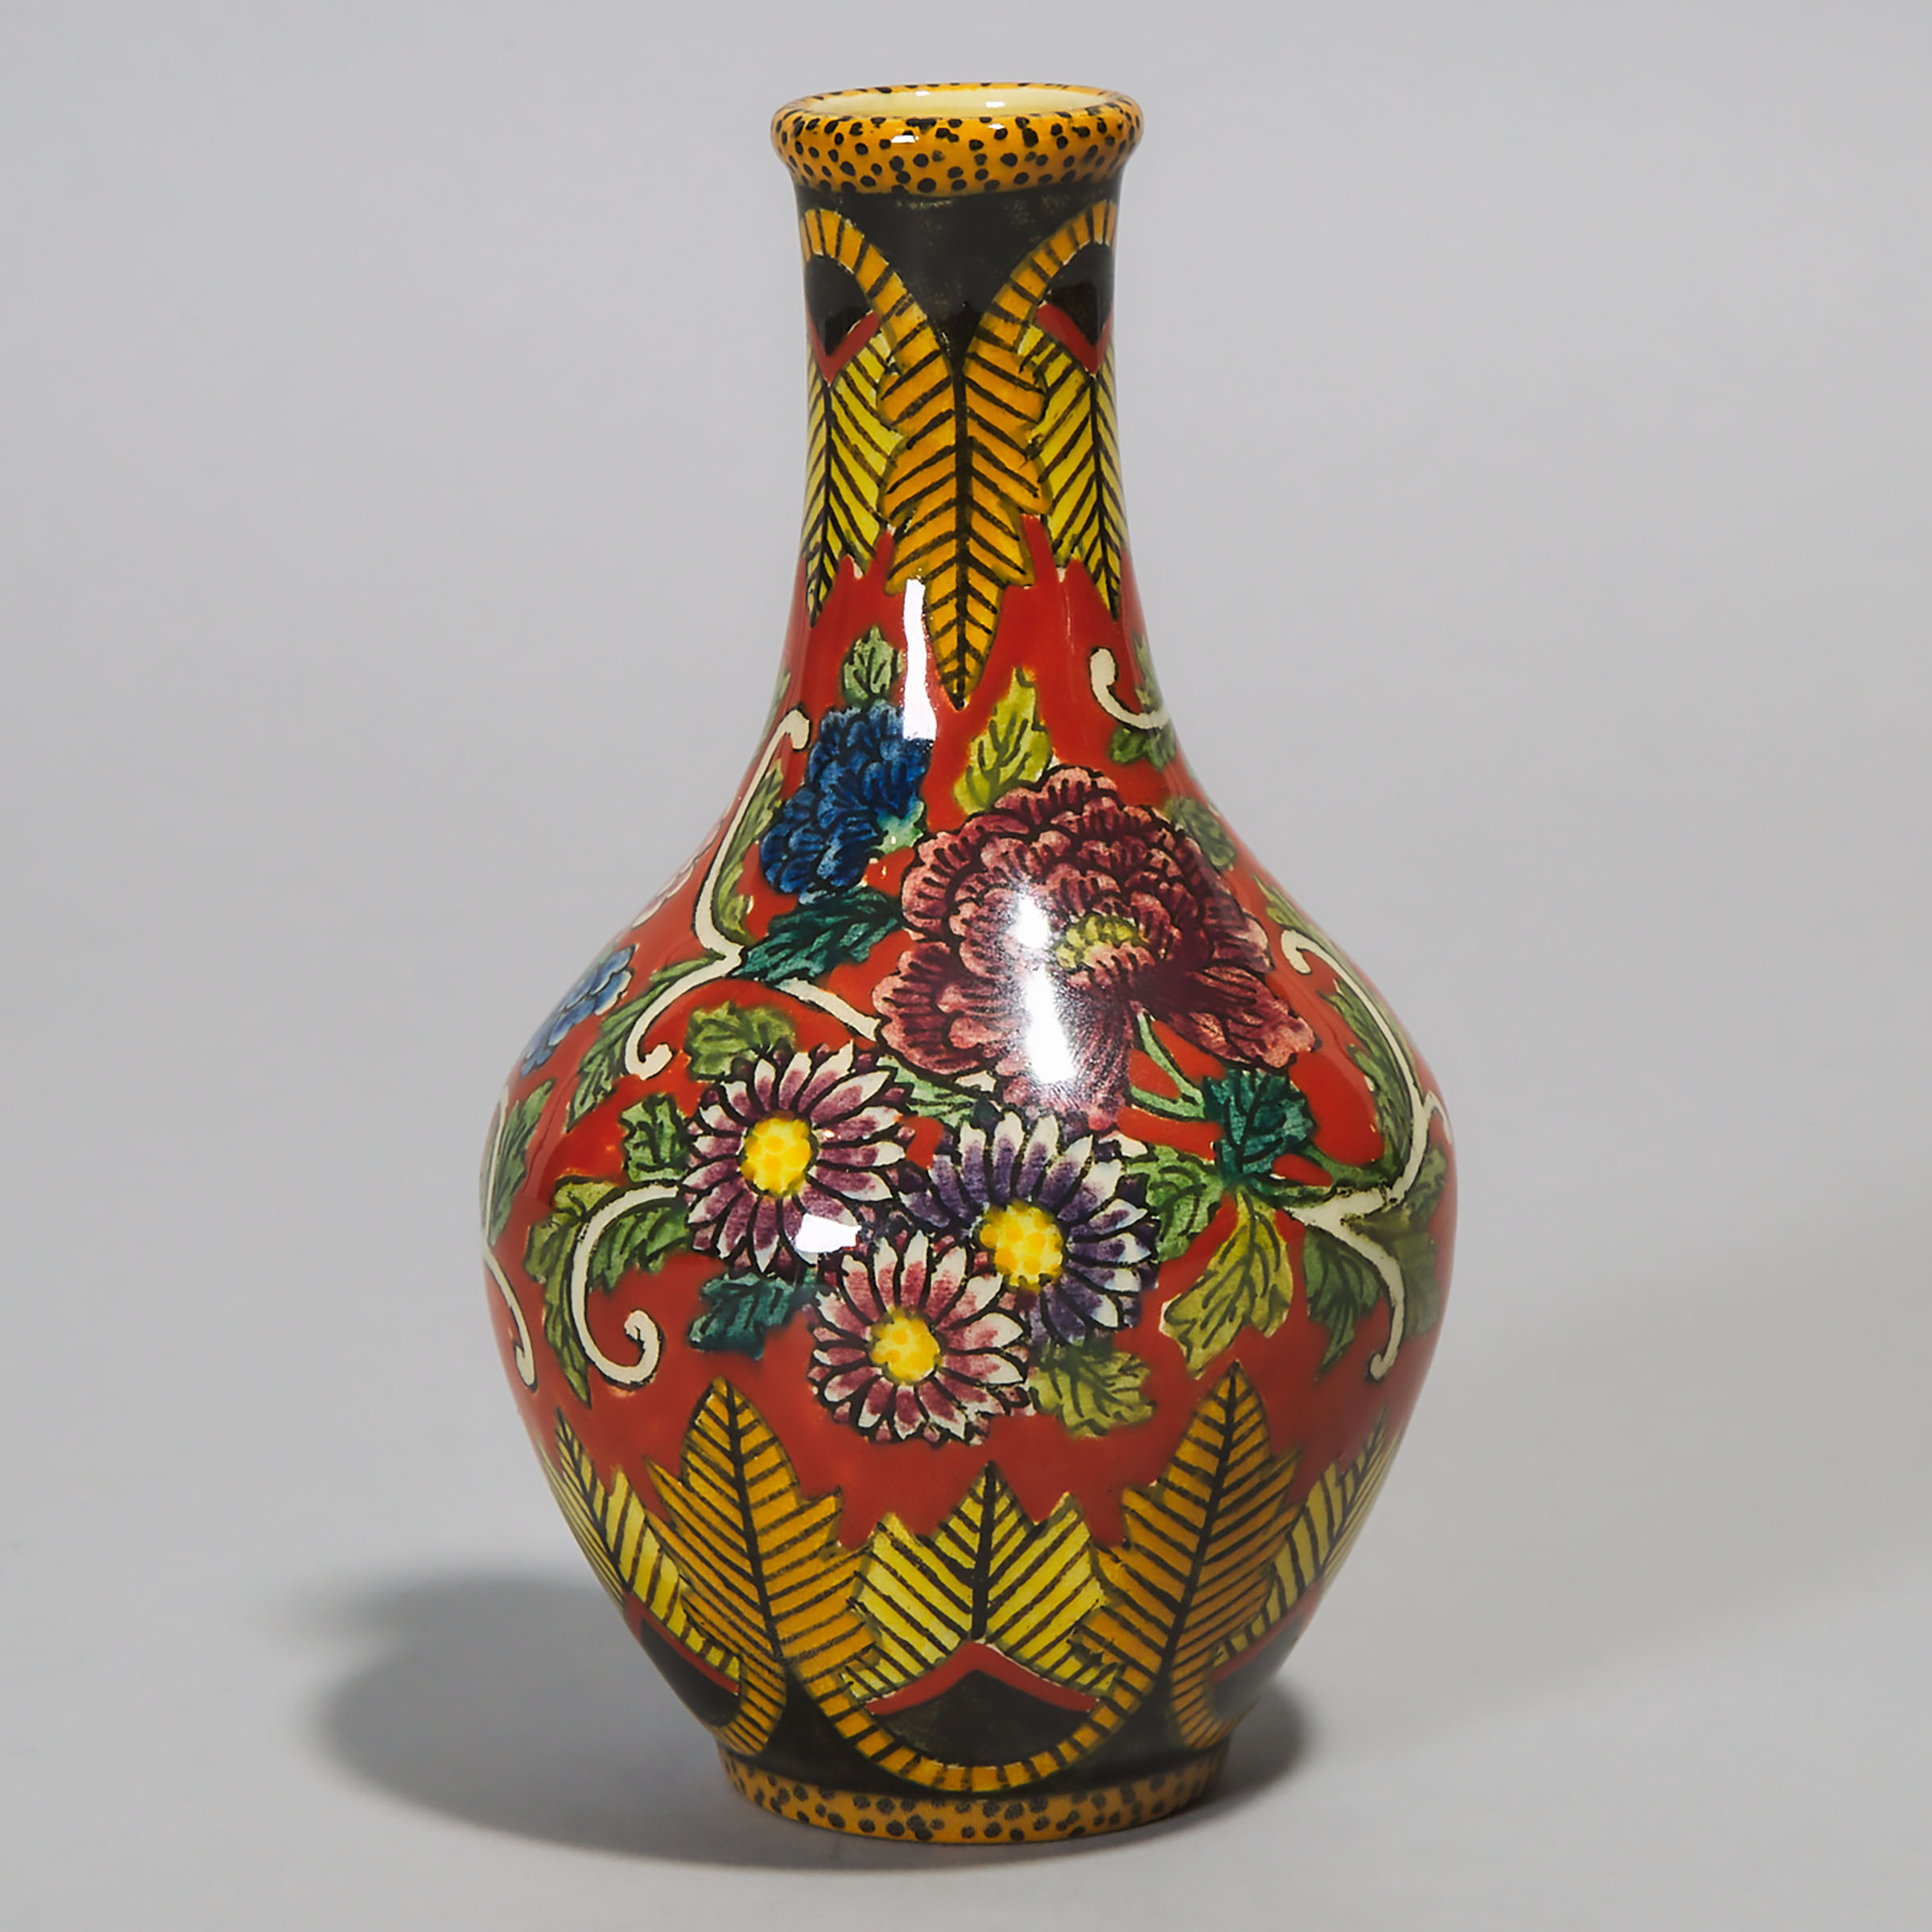 Milet Sèvres Small Vase, early 20th century